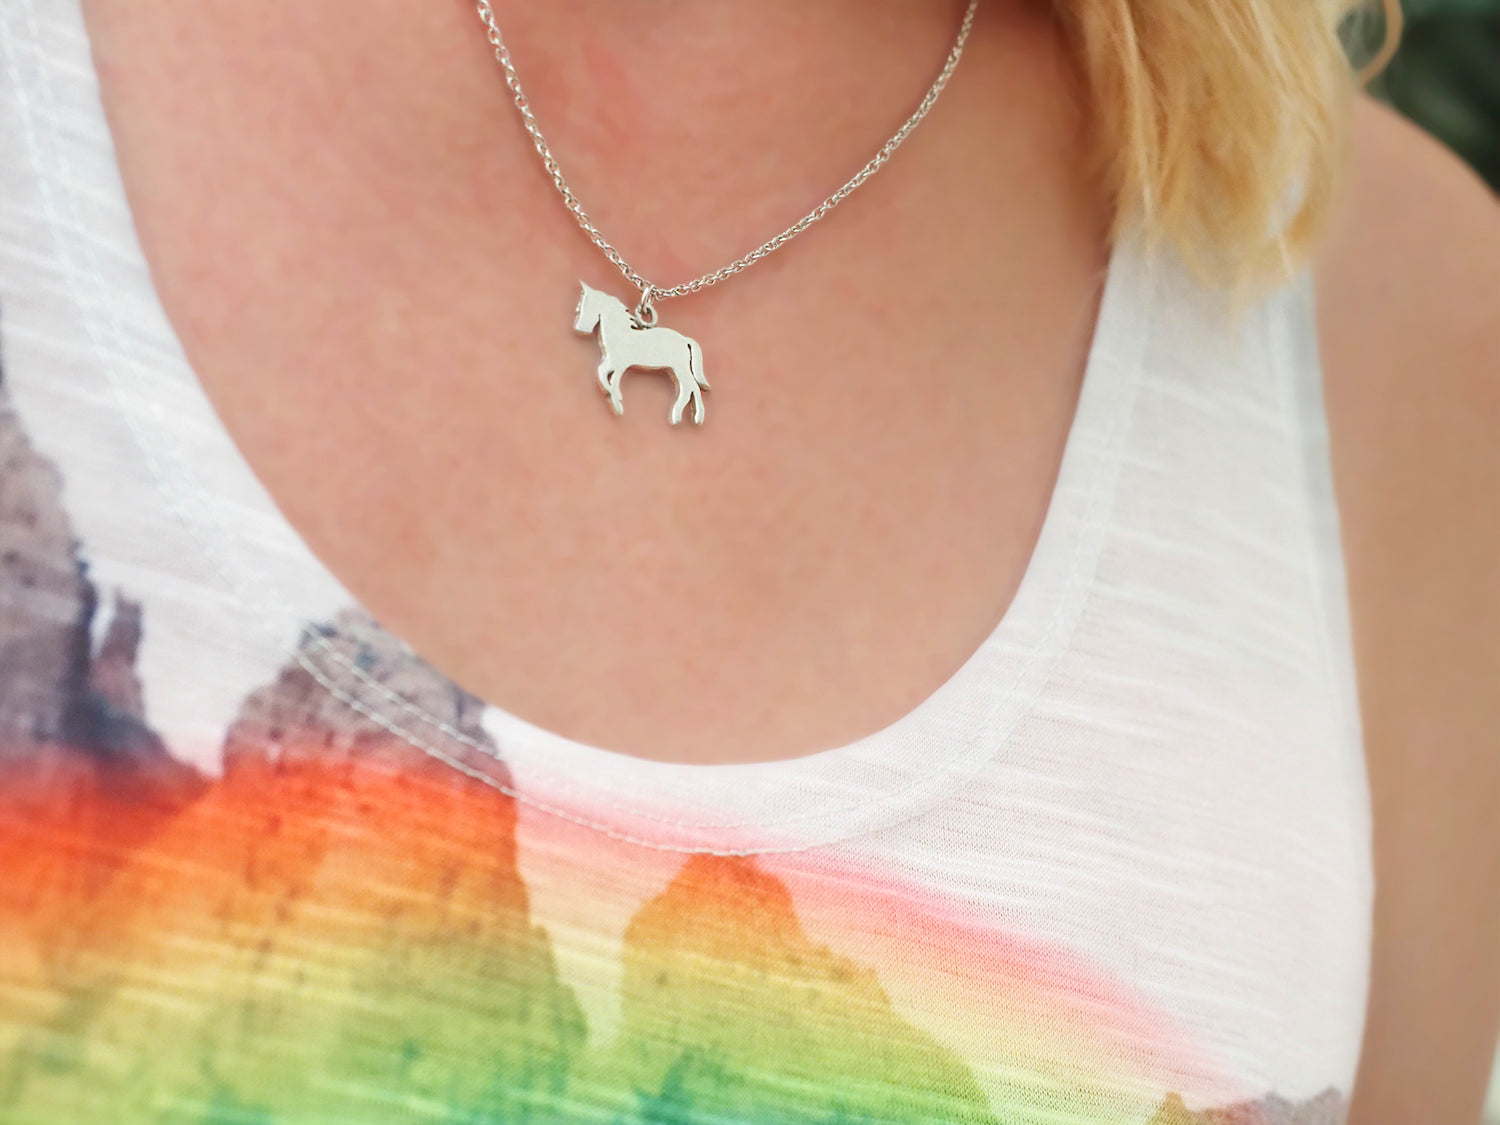 Unicorn Sterling Silver Heart Charm Necklace for Her